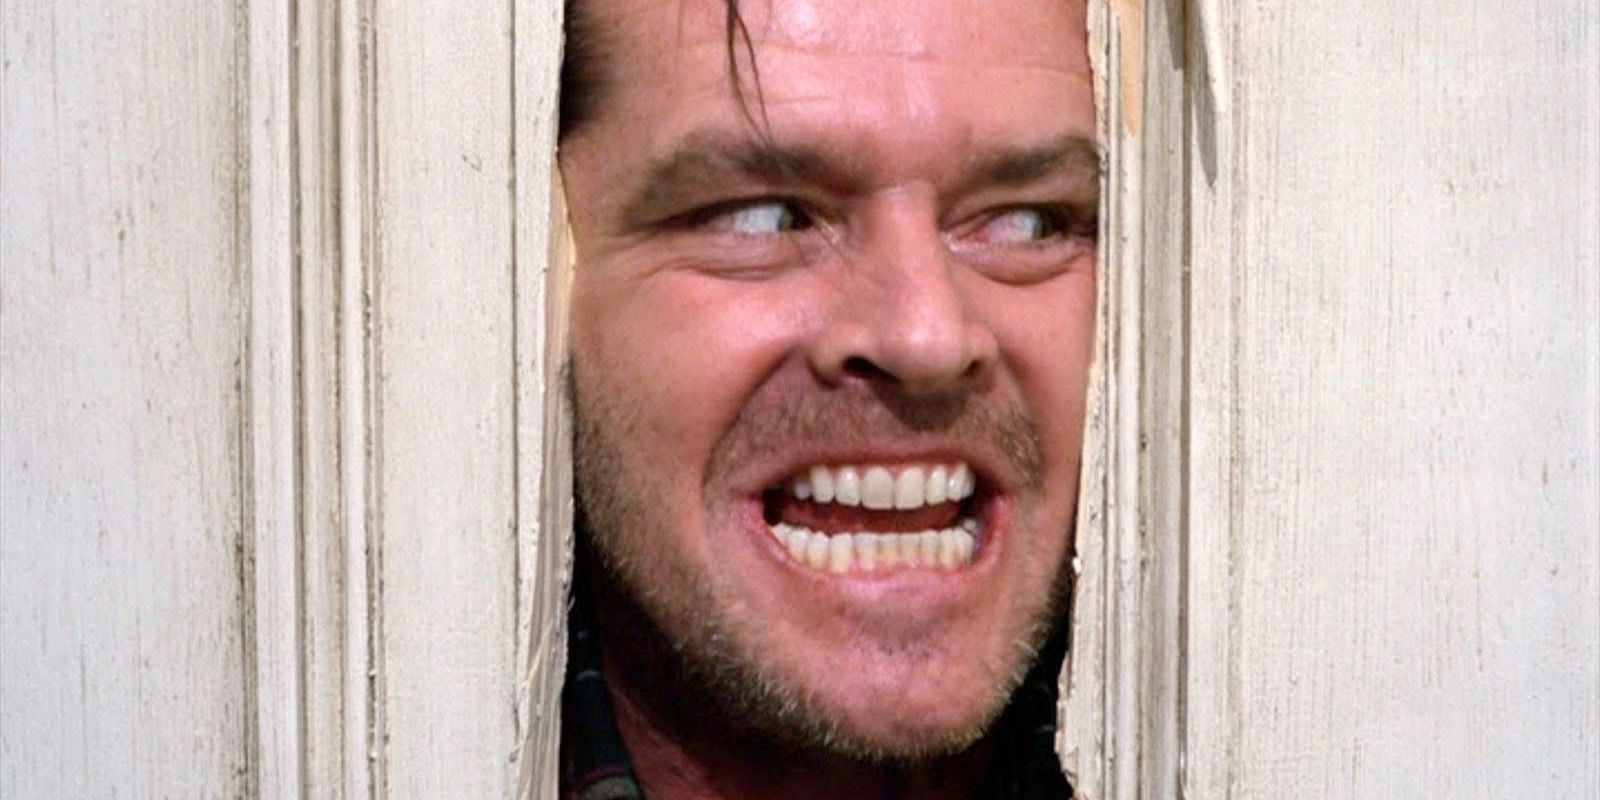 10 Creepy BehindTheScenes Facts About The Shining